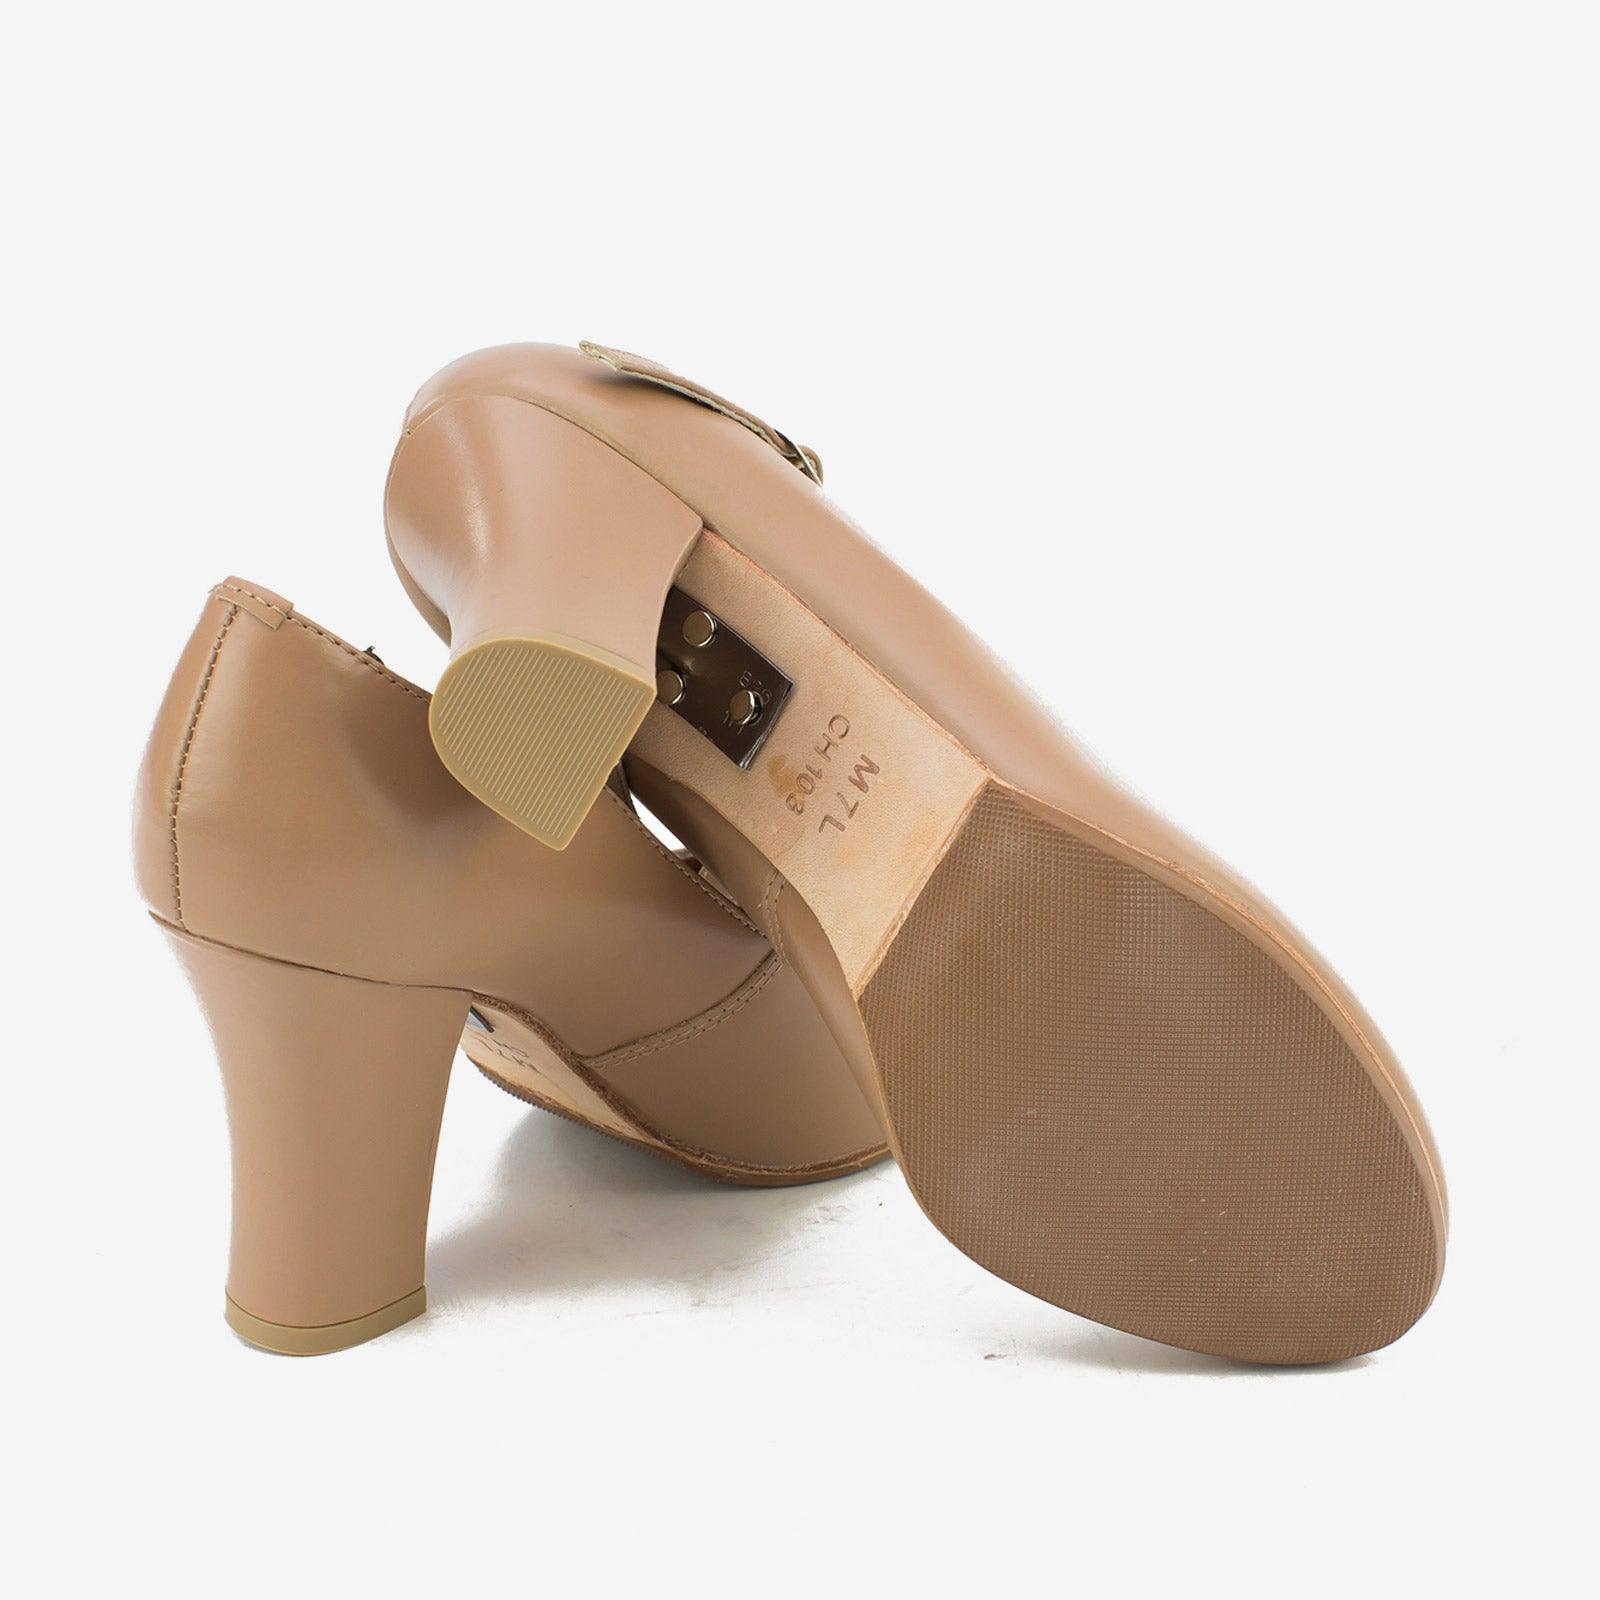 Nude Character Shoe Leather